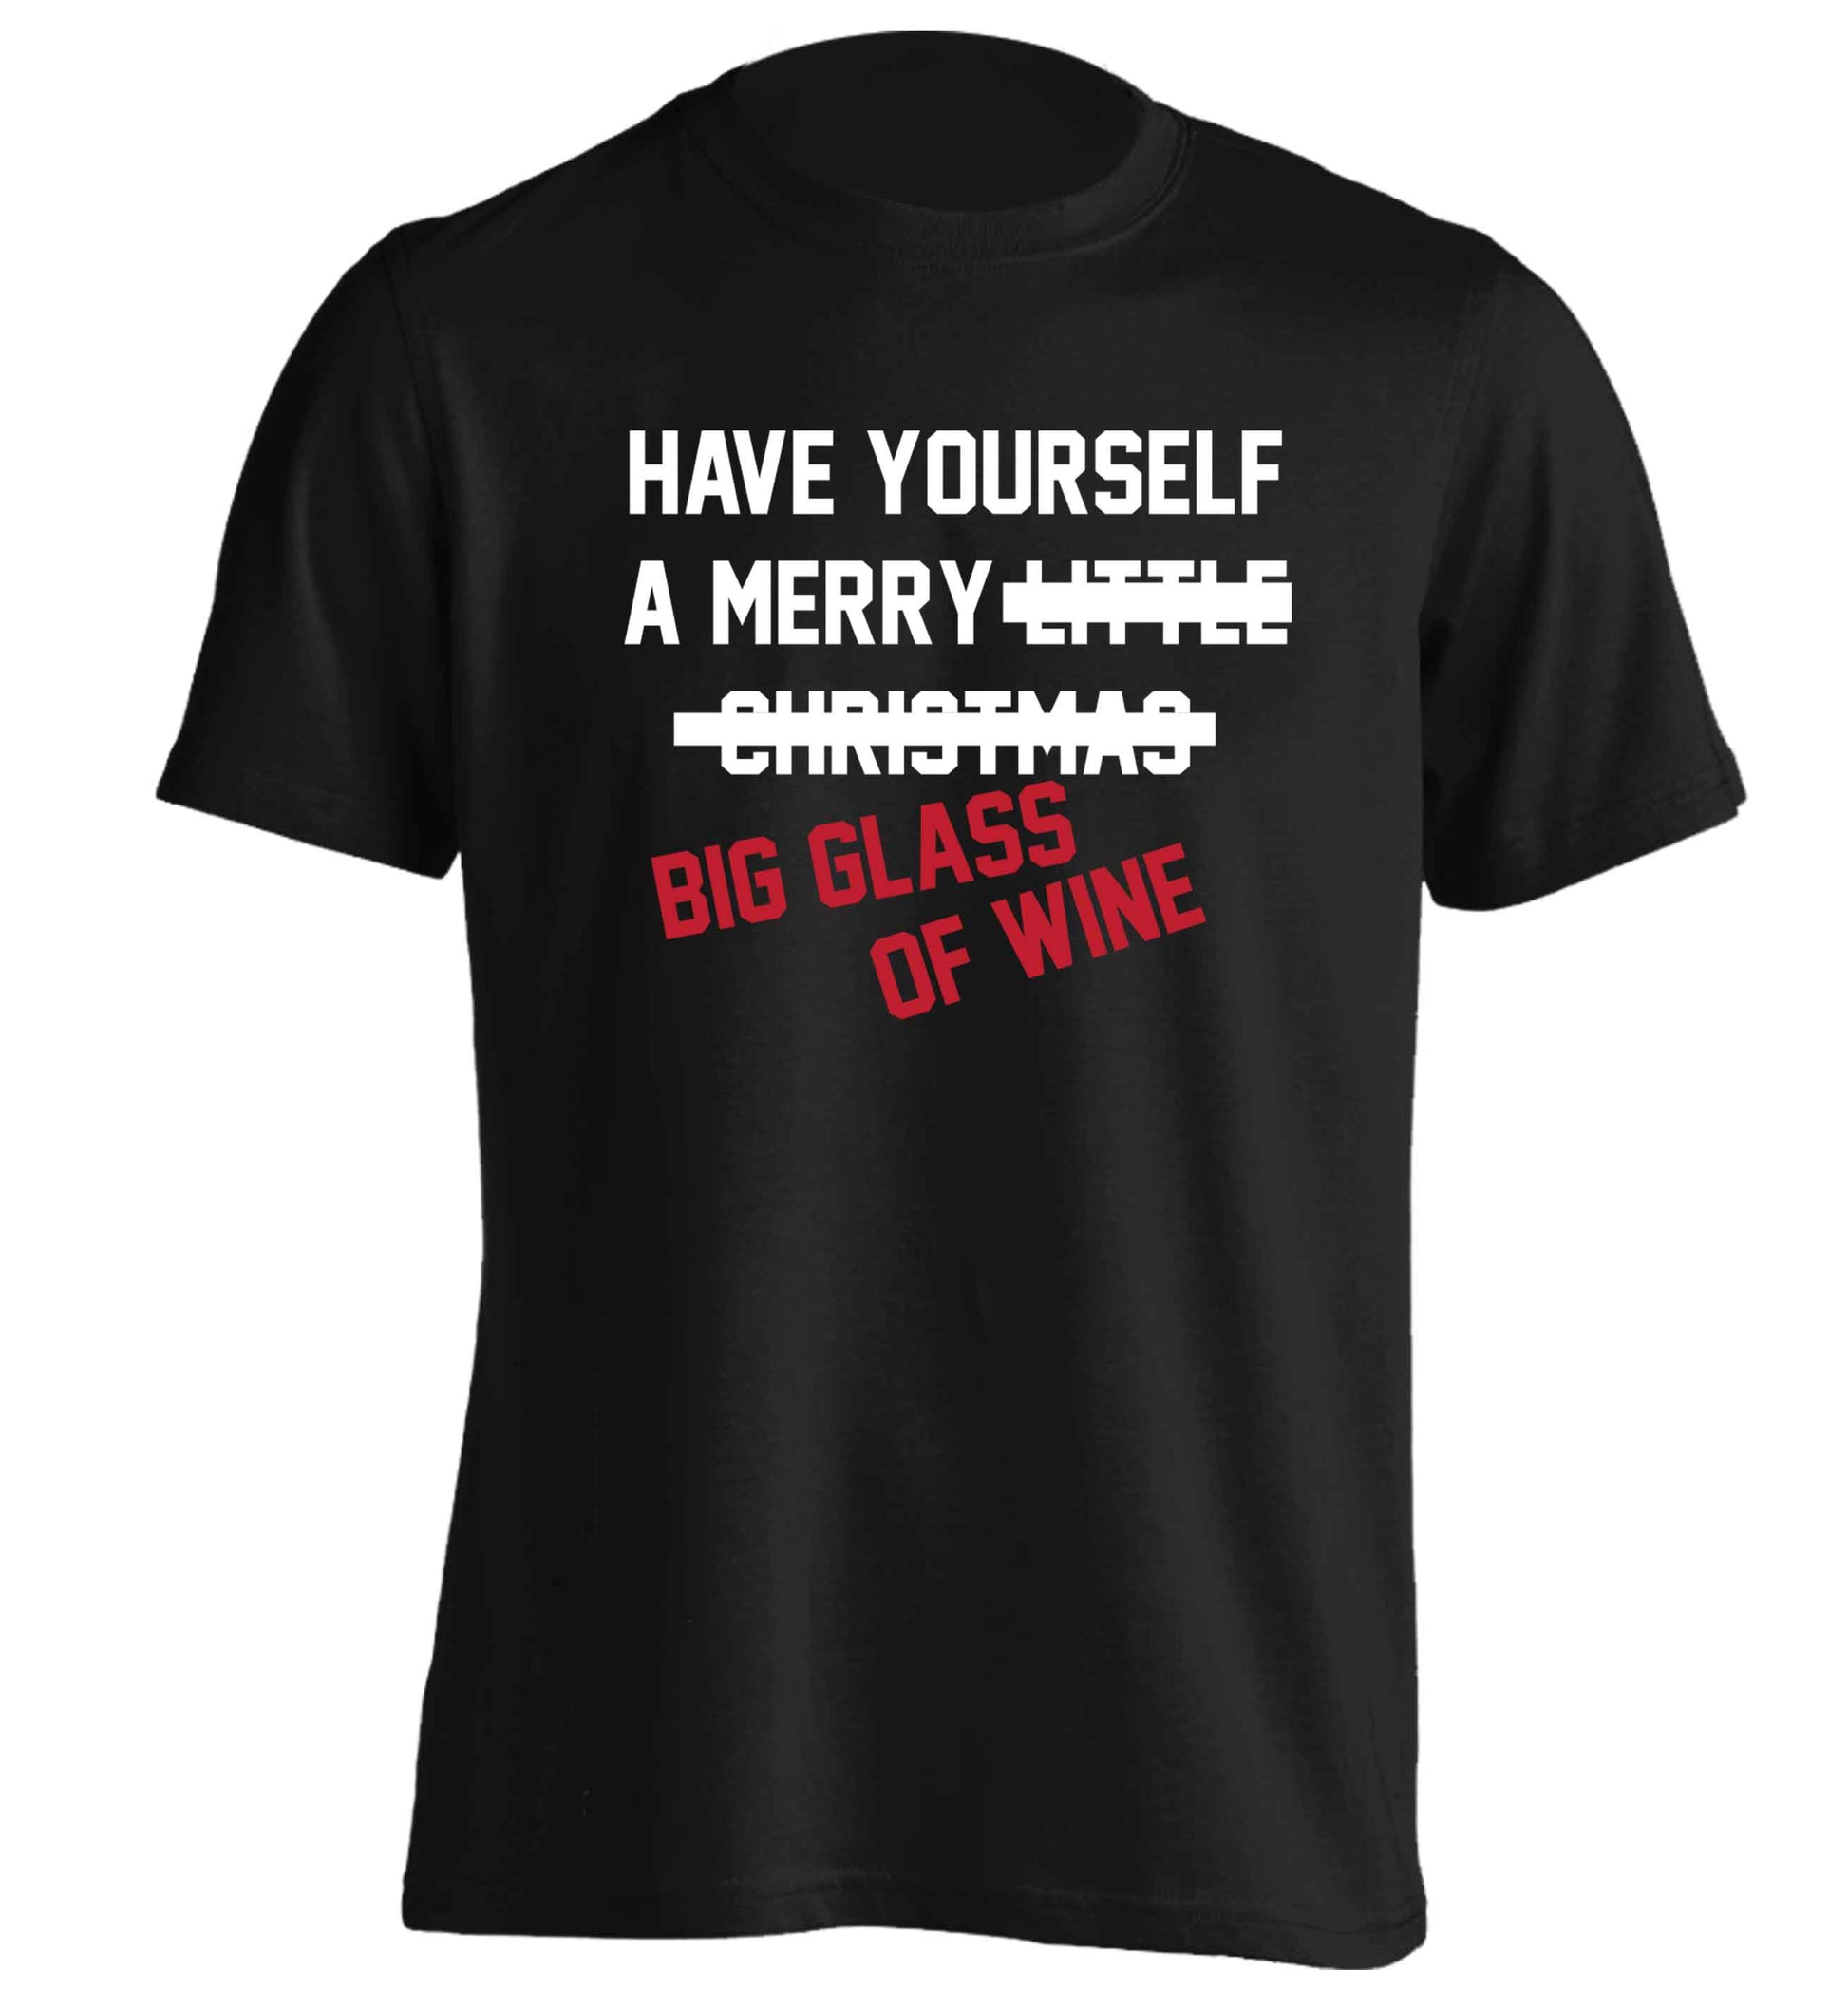 Have yourself a merry big glass of wine adults unisex black Tshirt 2XL